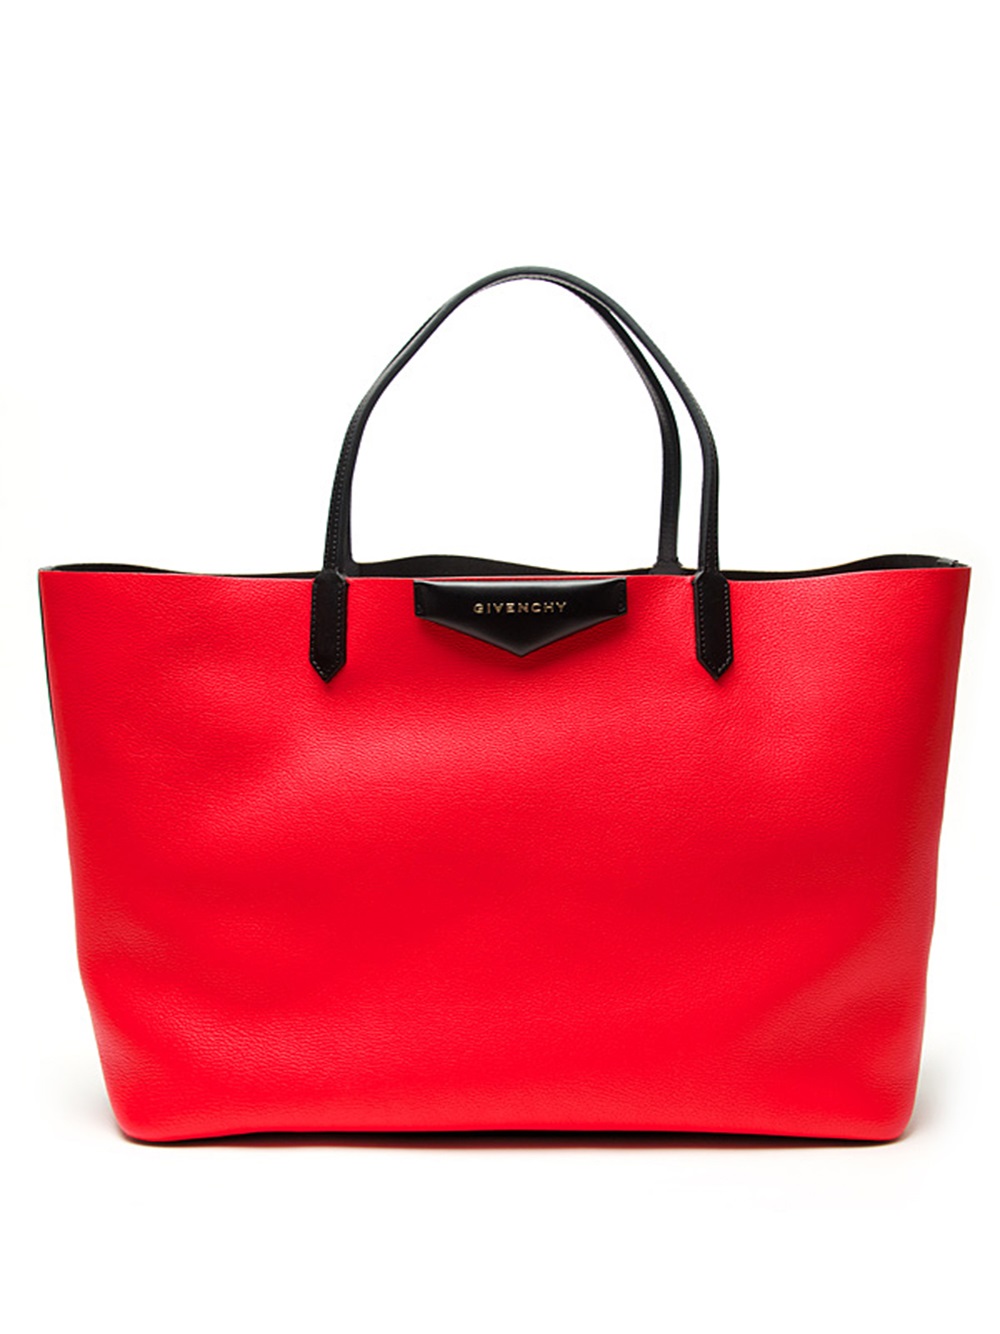 Lyst - Givenchy Large Antigona Bag in Red